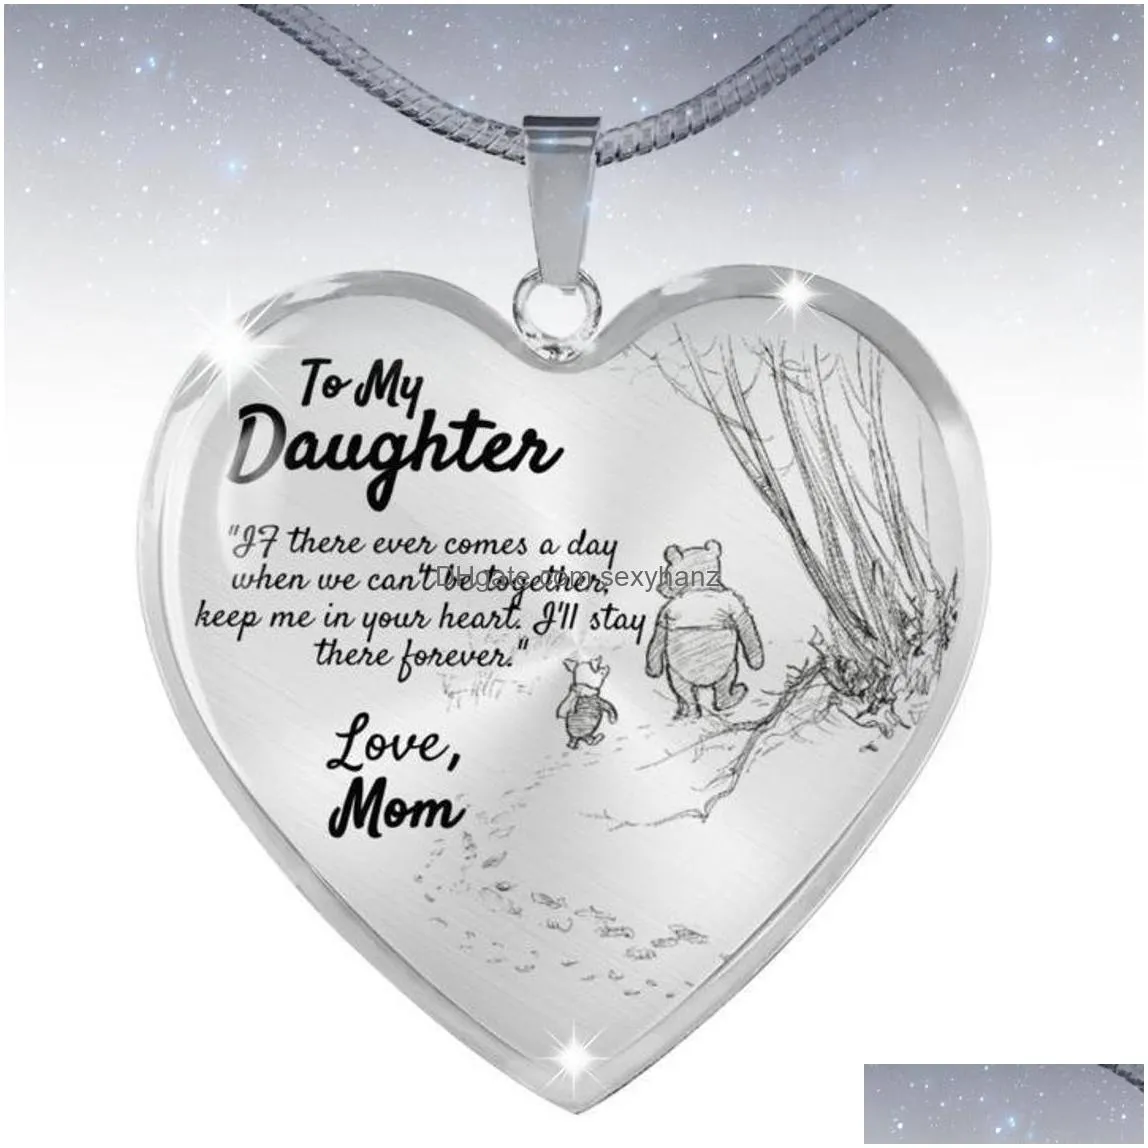 fashion jewelry love heart necklace to my daughter love dad mon heart pendnt necklace